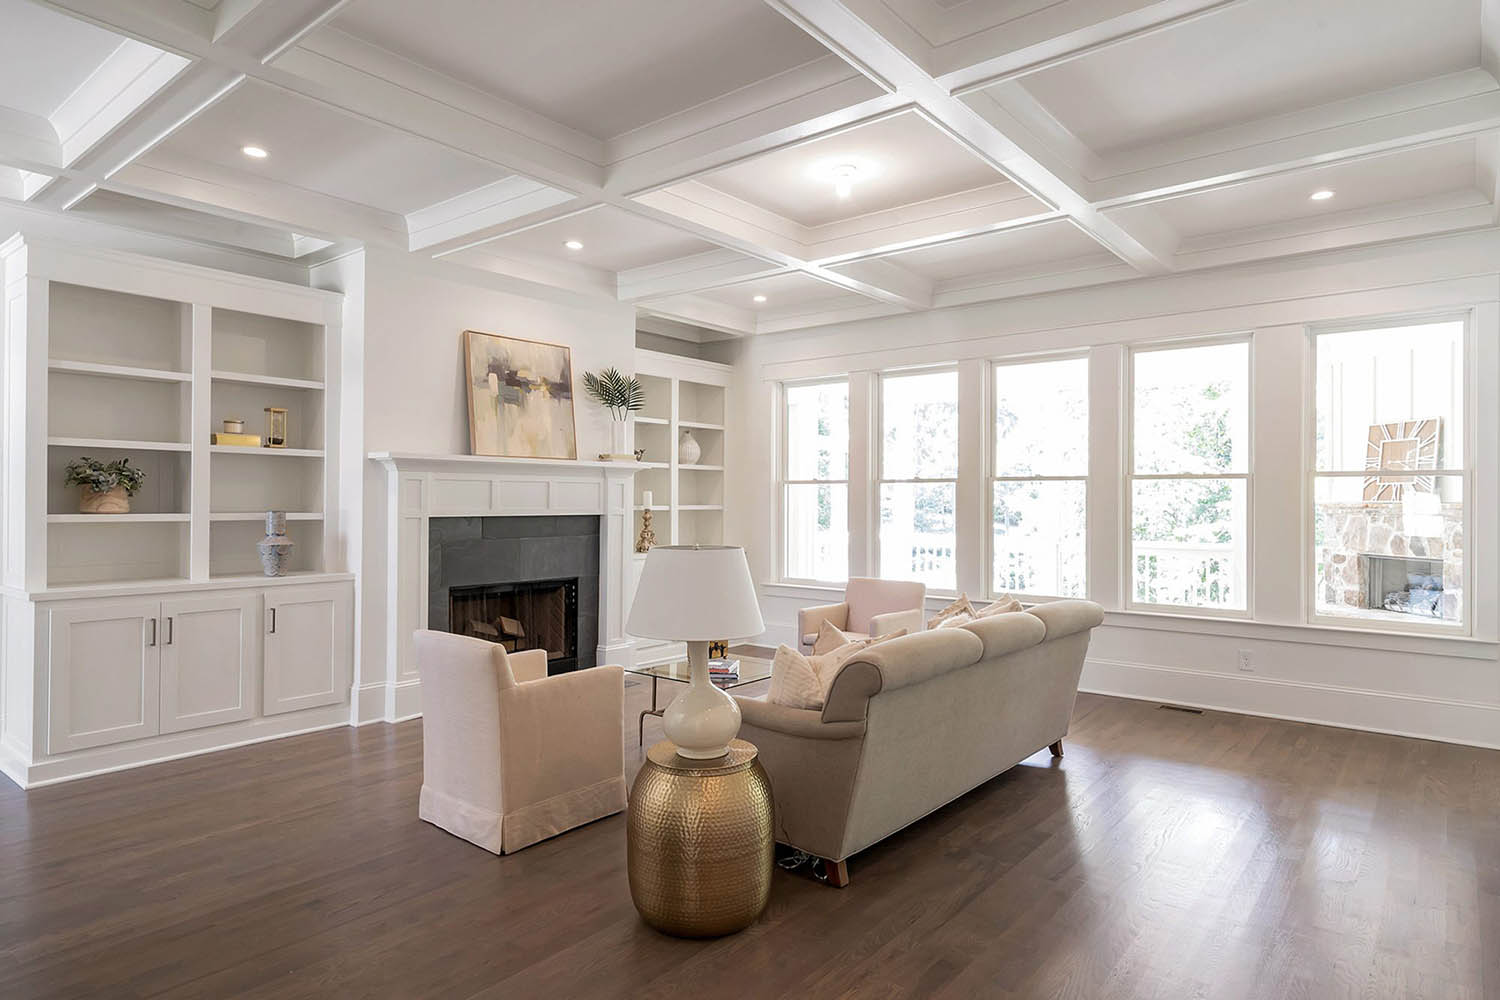 Living room coffered ceiling. White walls and ceiling. White trim and built ins with gray tile fireplace surround.